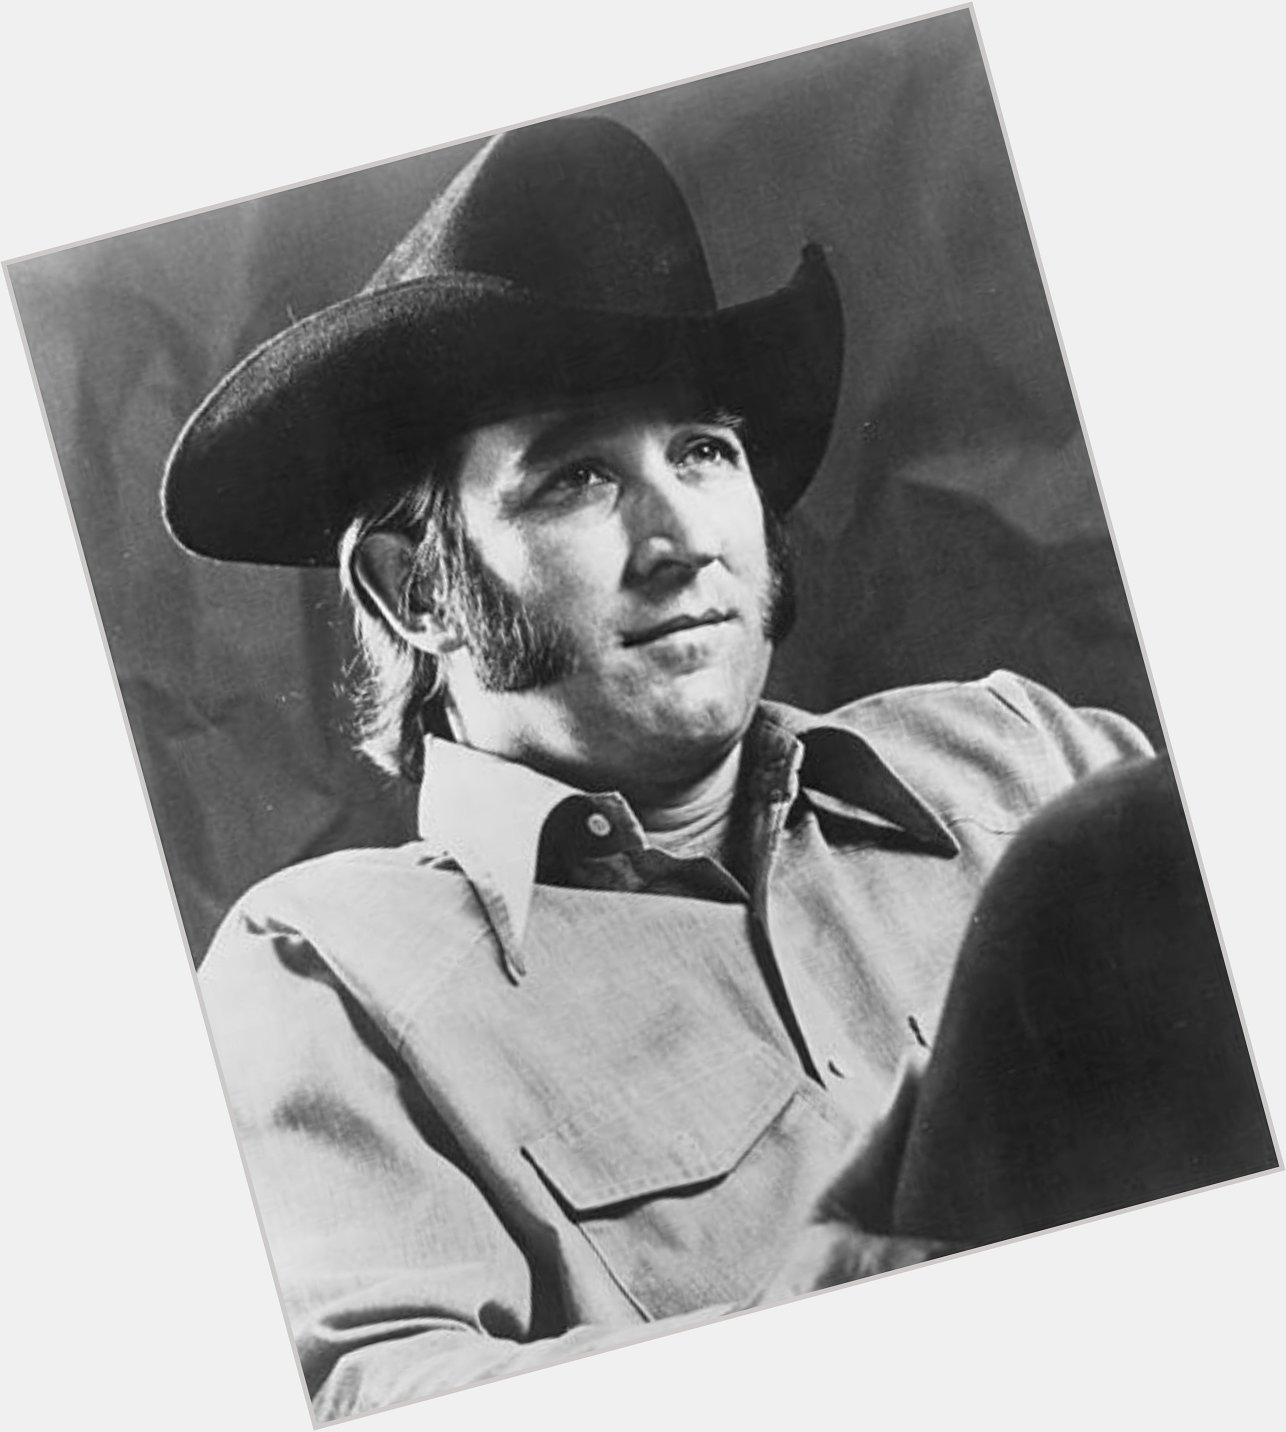  Happy Birthday Don Williams
*Born on this day in 1939* 